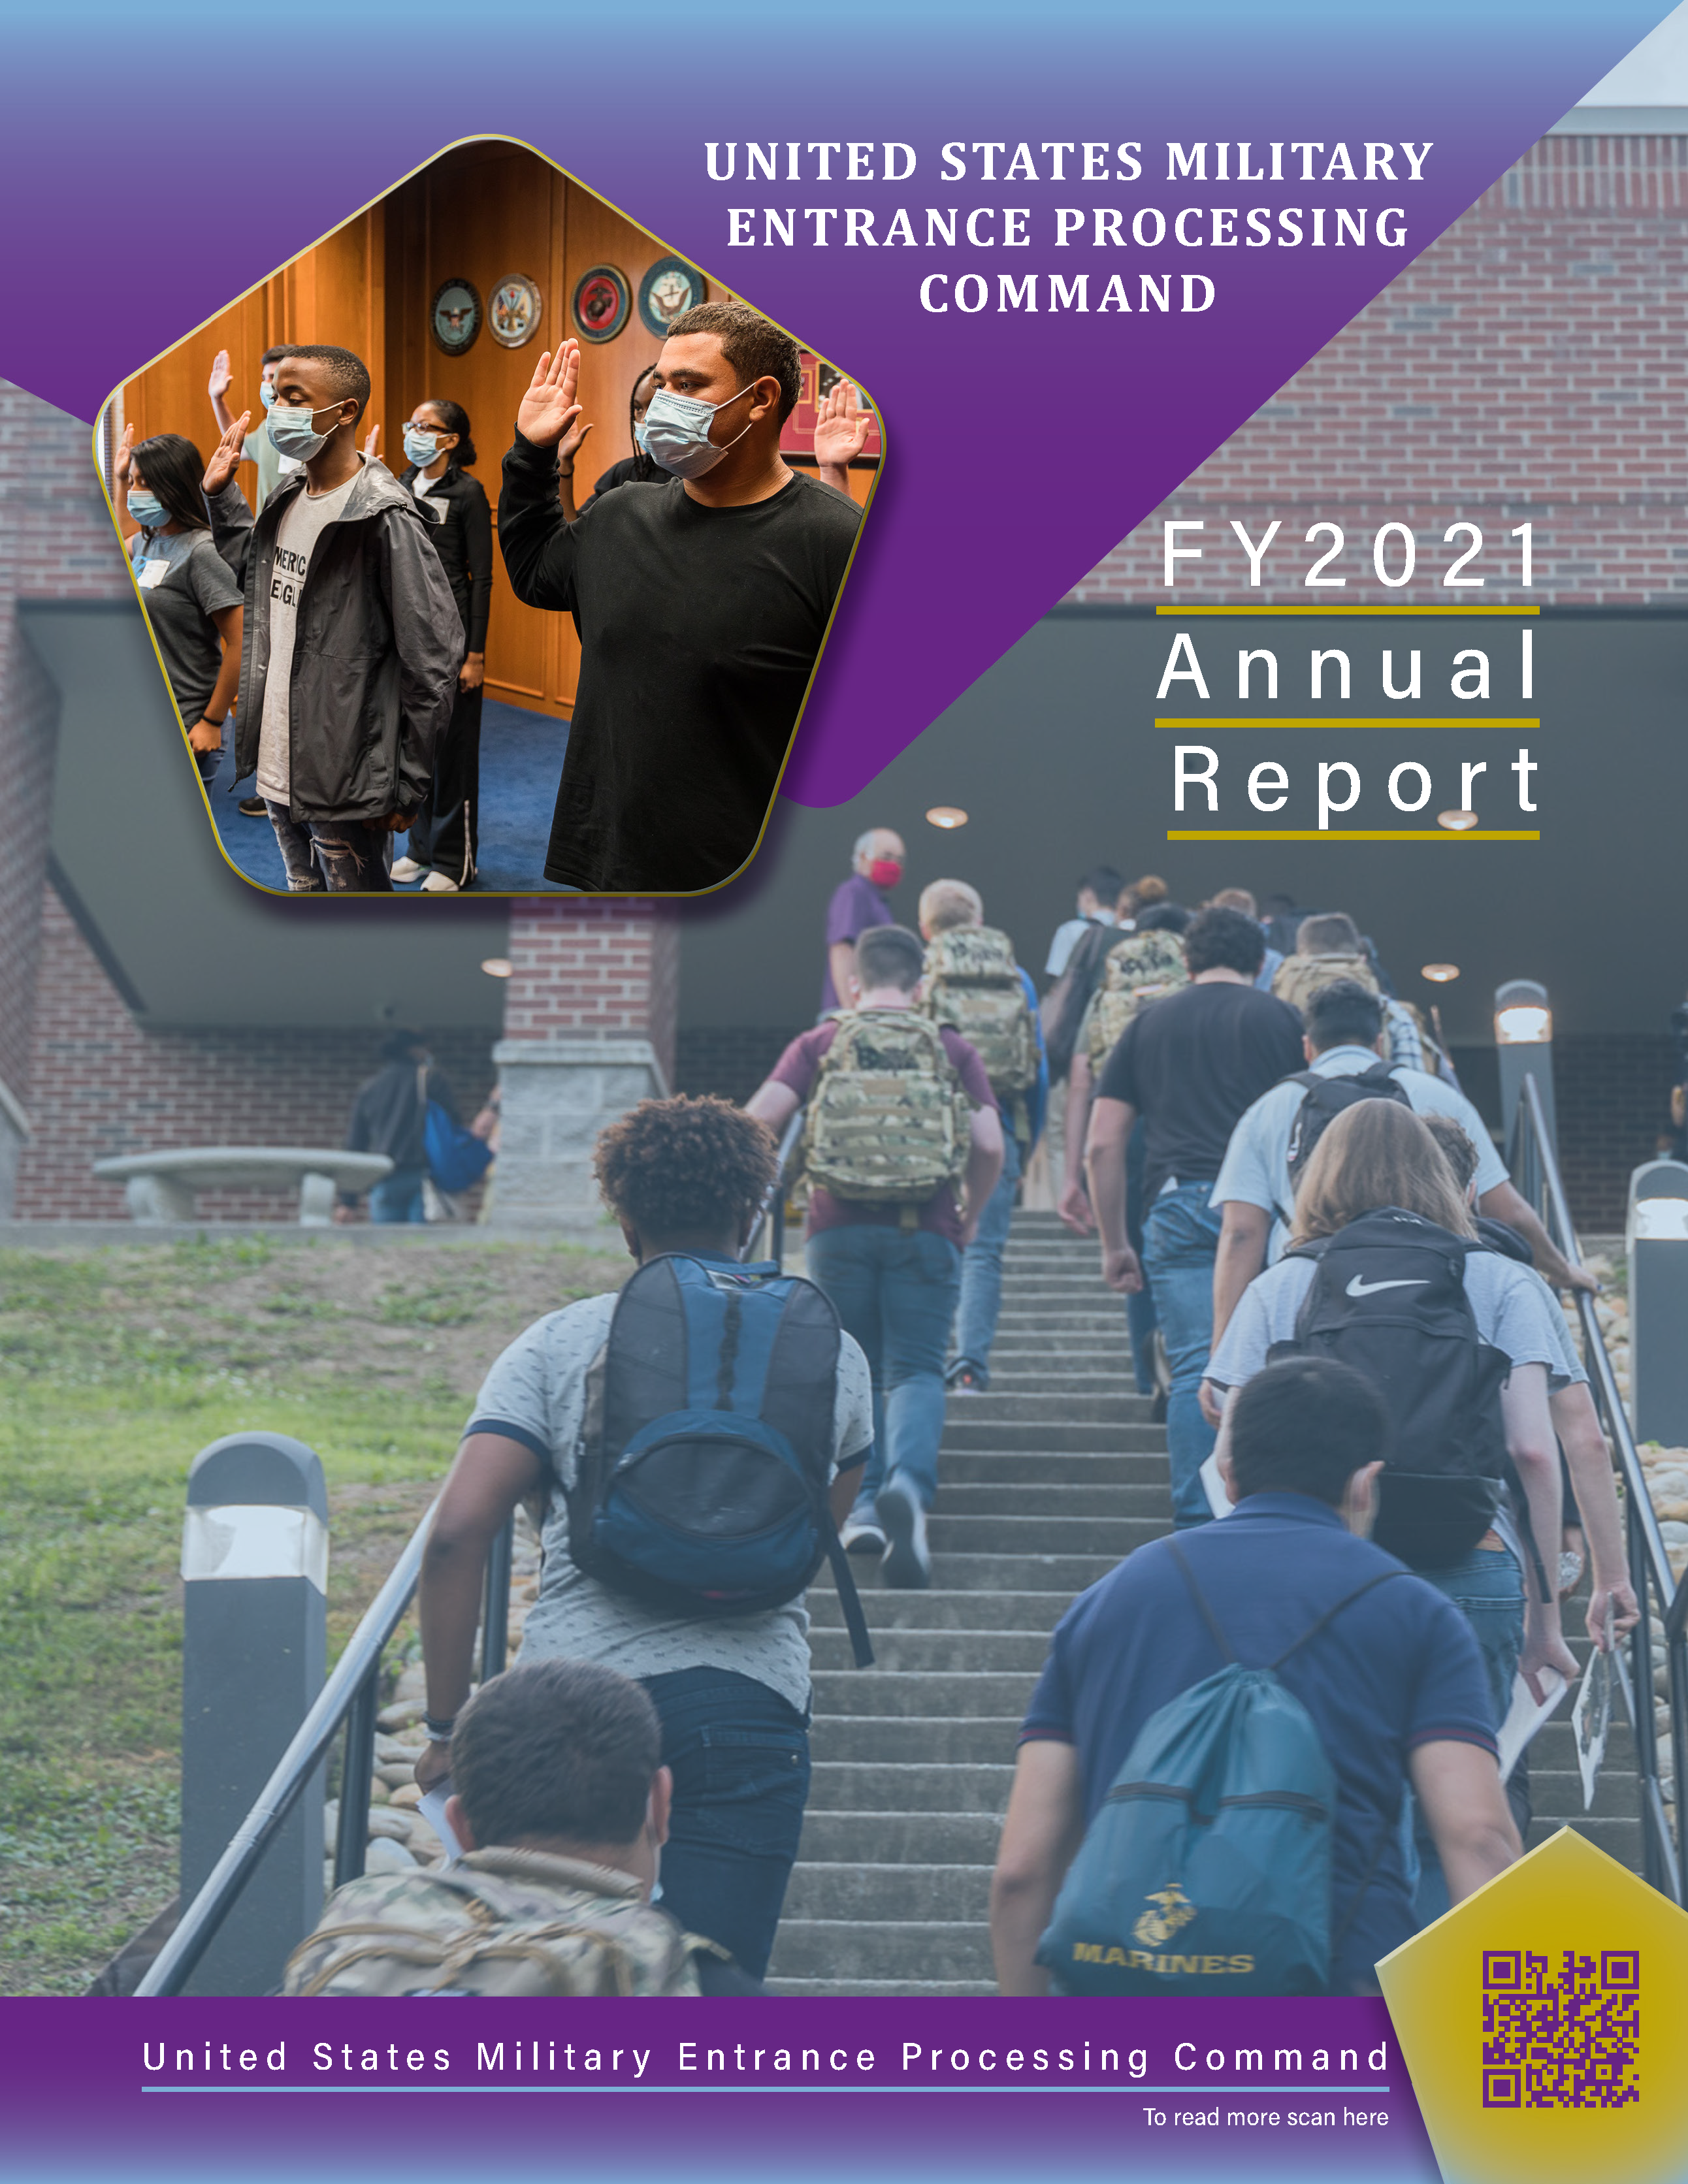 Click to view the Command Annual Report